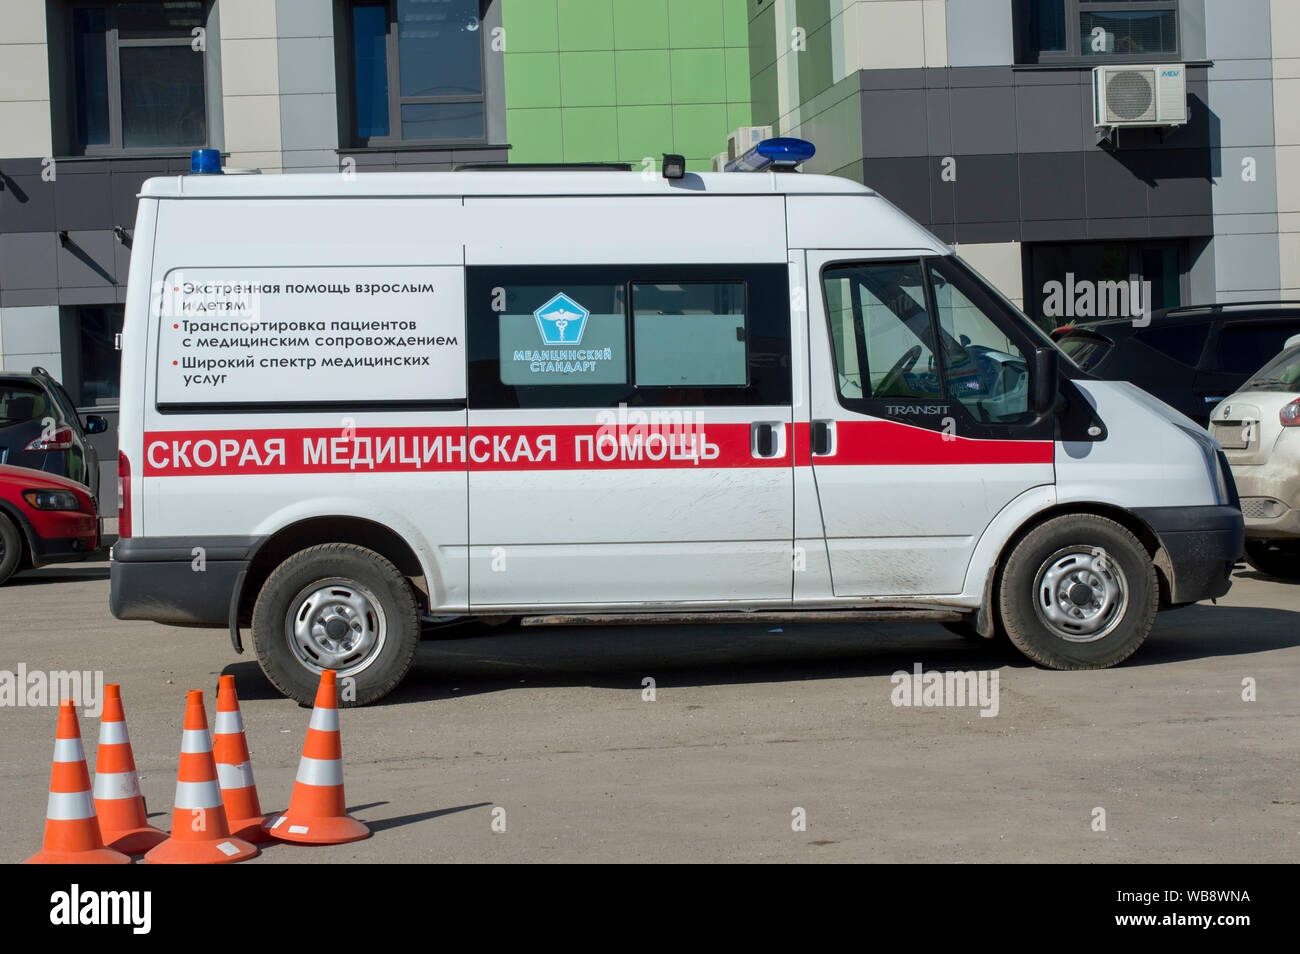 Ambulance van, 01, based on a GAZelle. Exhibited sample for display. Russia. Stock Photo